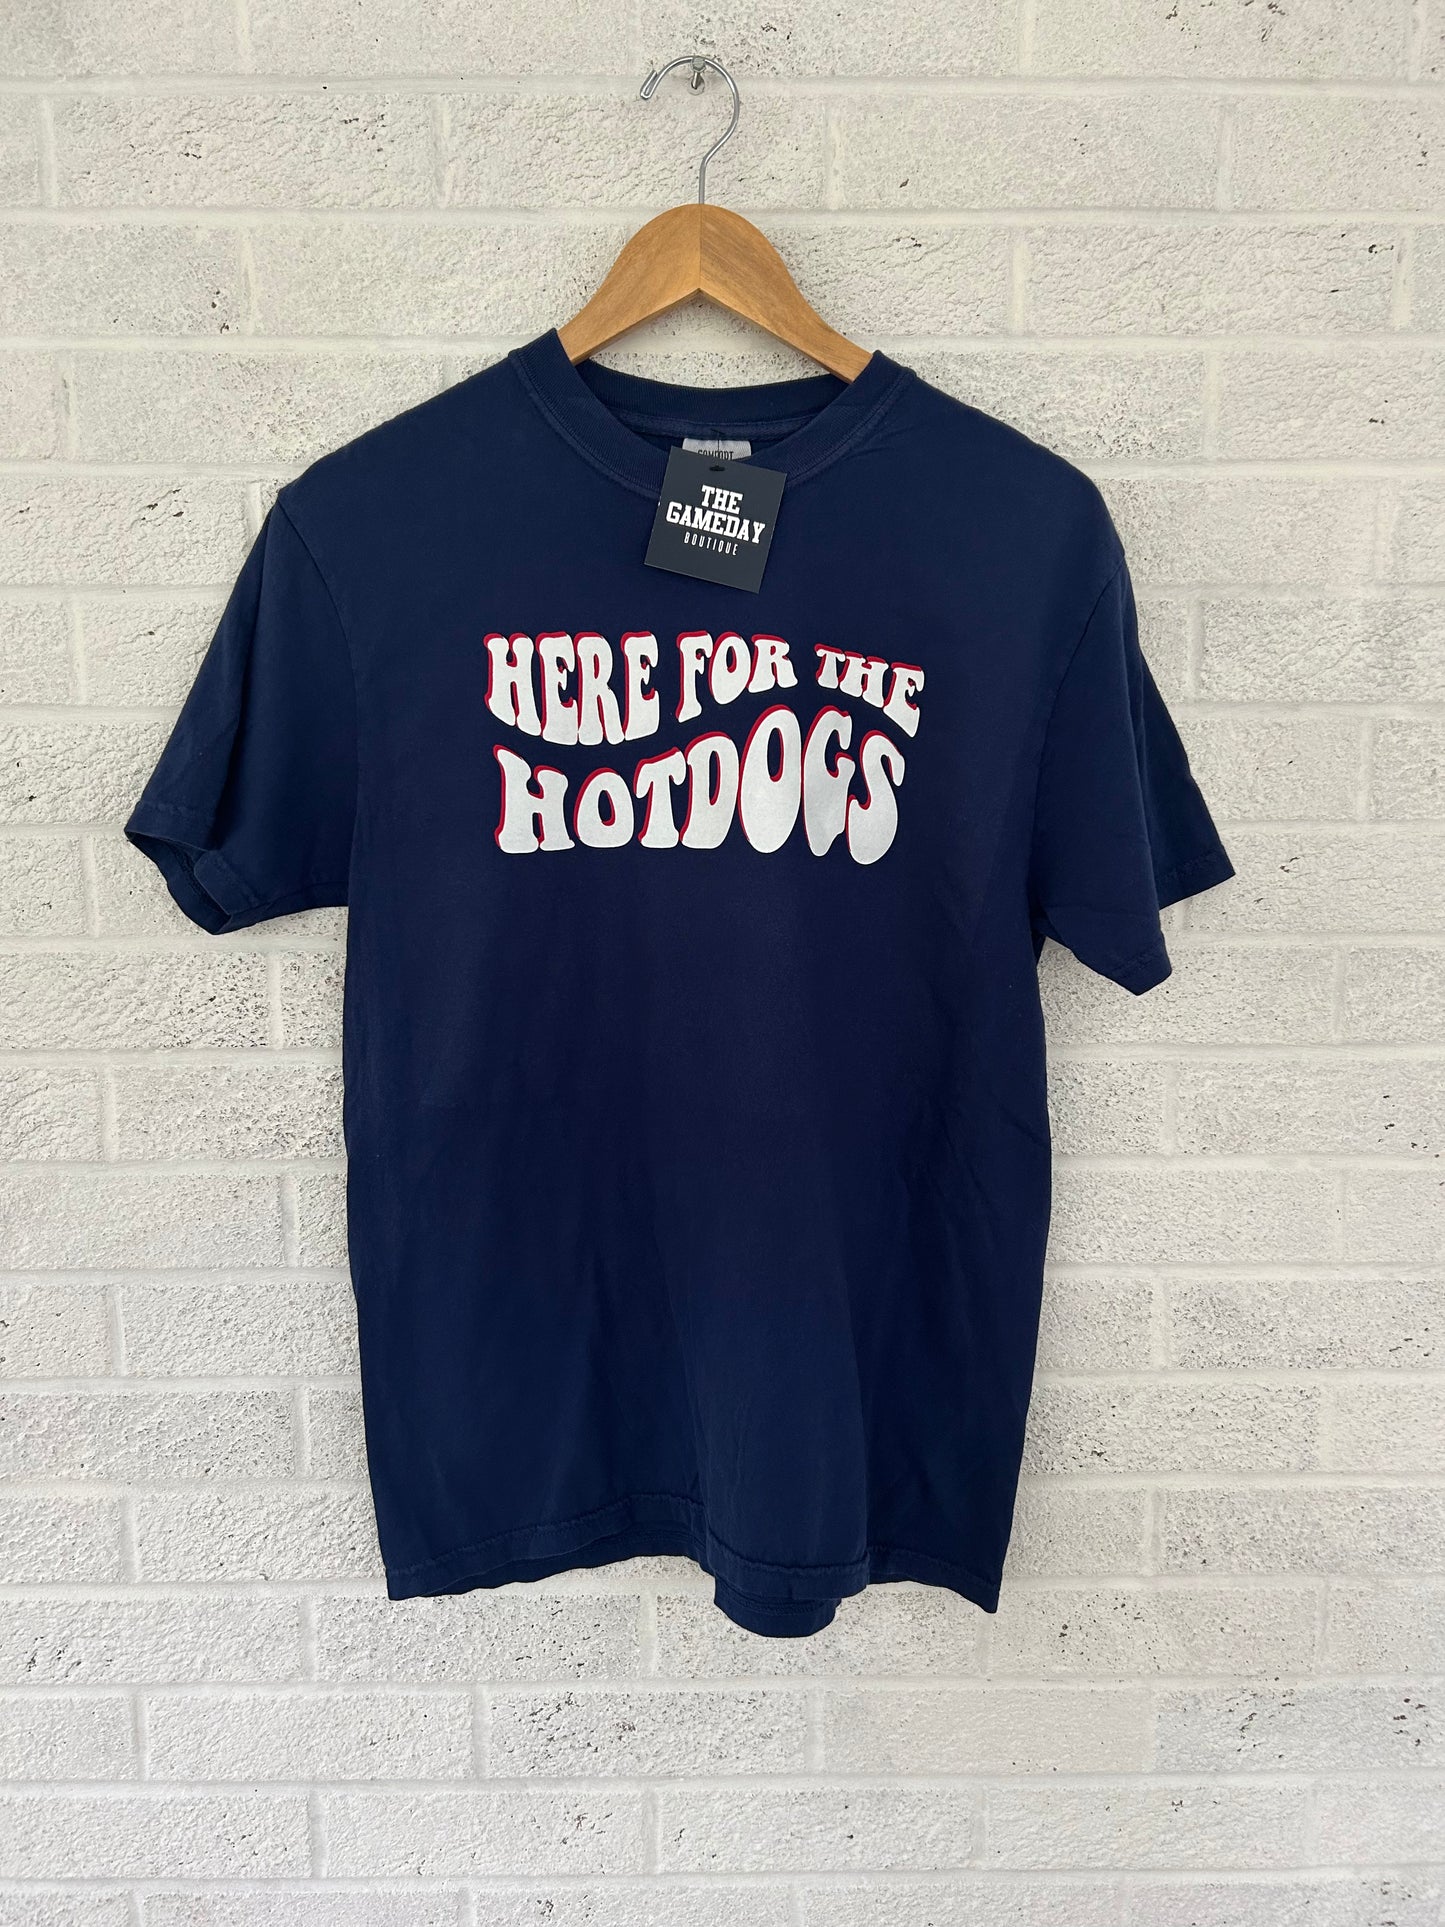 Here for the Hotdogs Short-Sleeve T-shirt